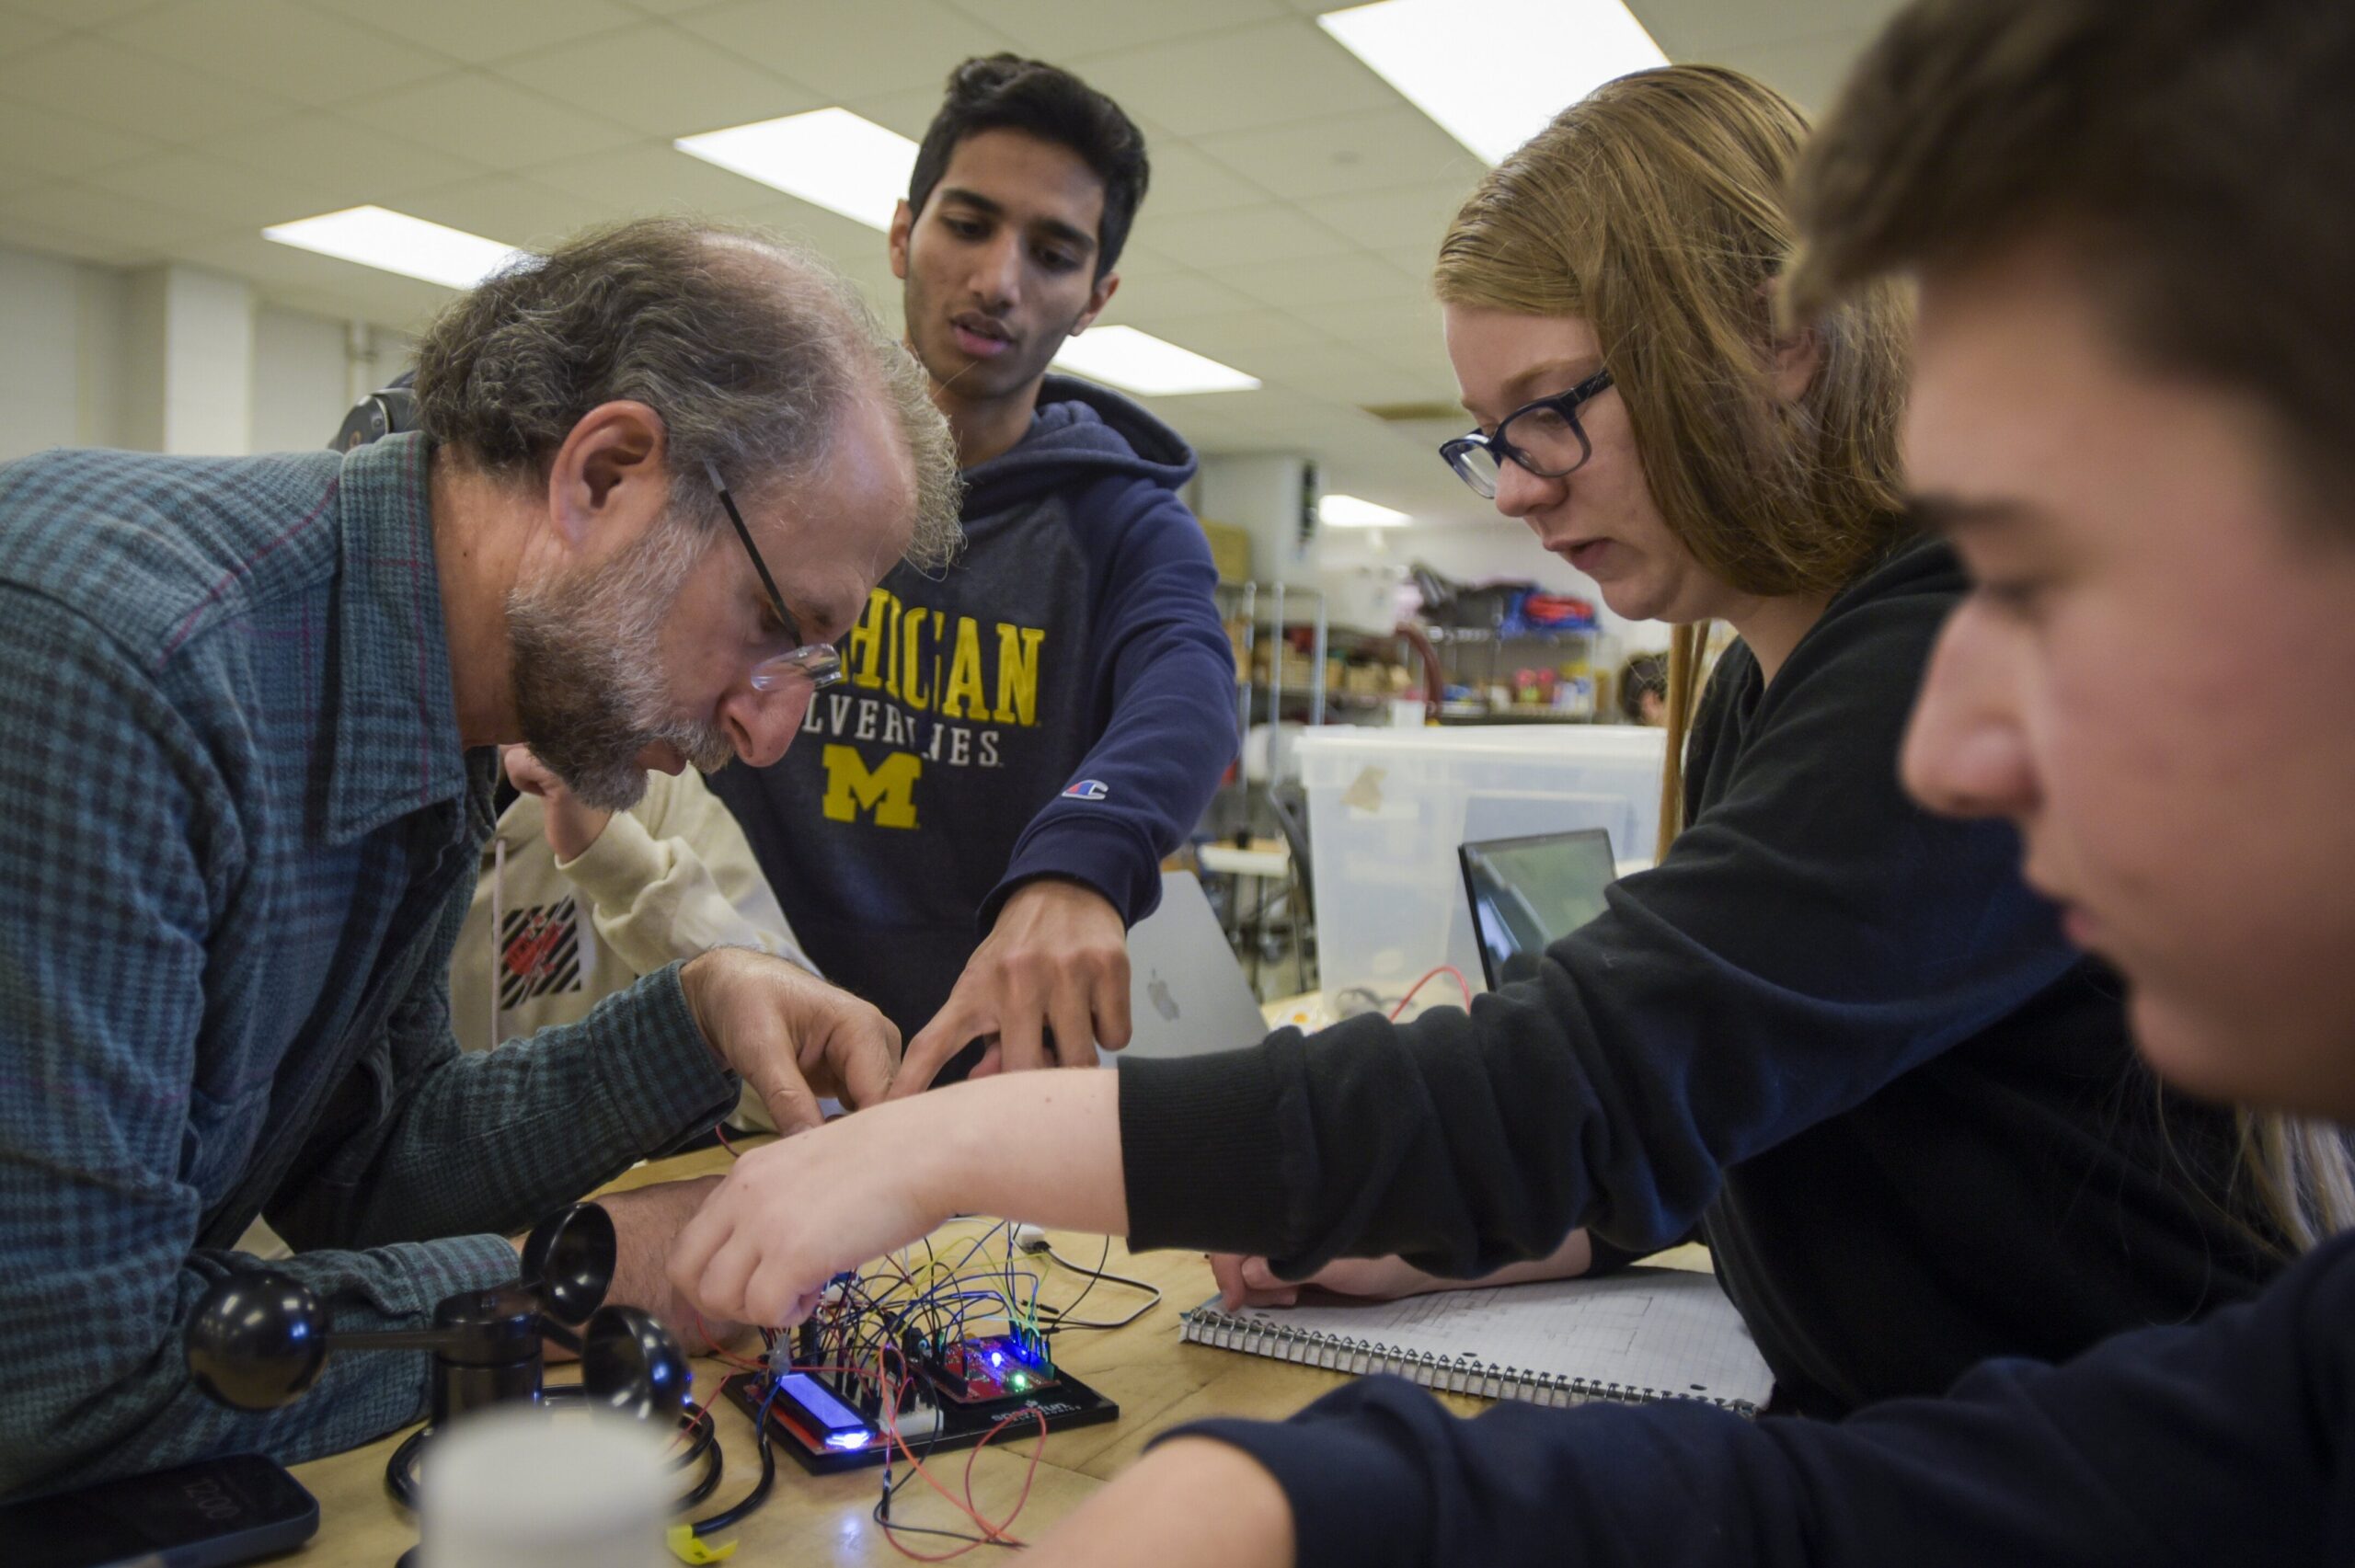 Instructor and three students working on circuit board together